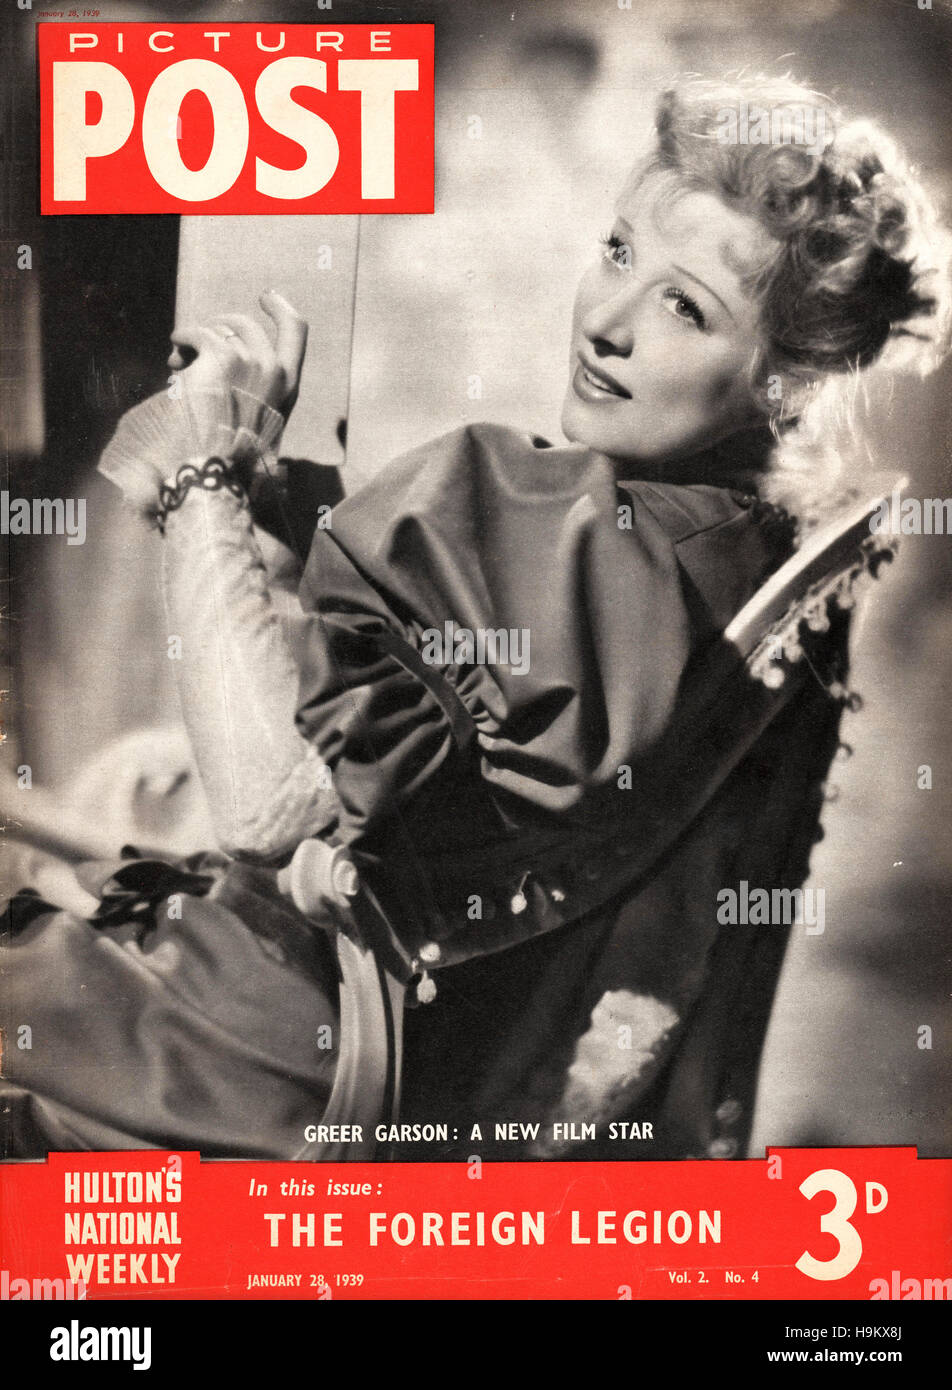 1939 Picture Post Actress Greer Garson Stock Photo